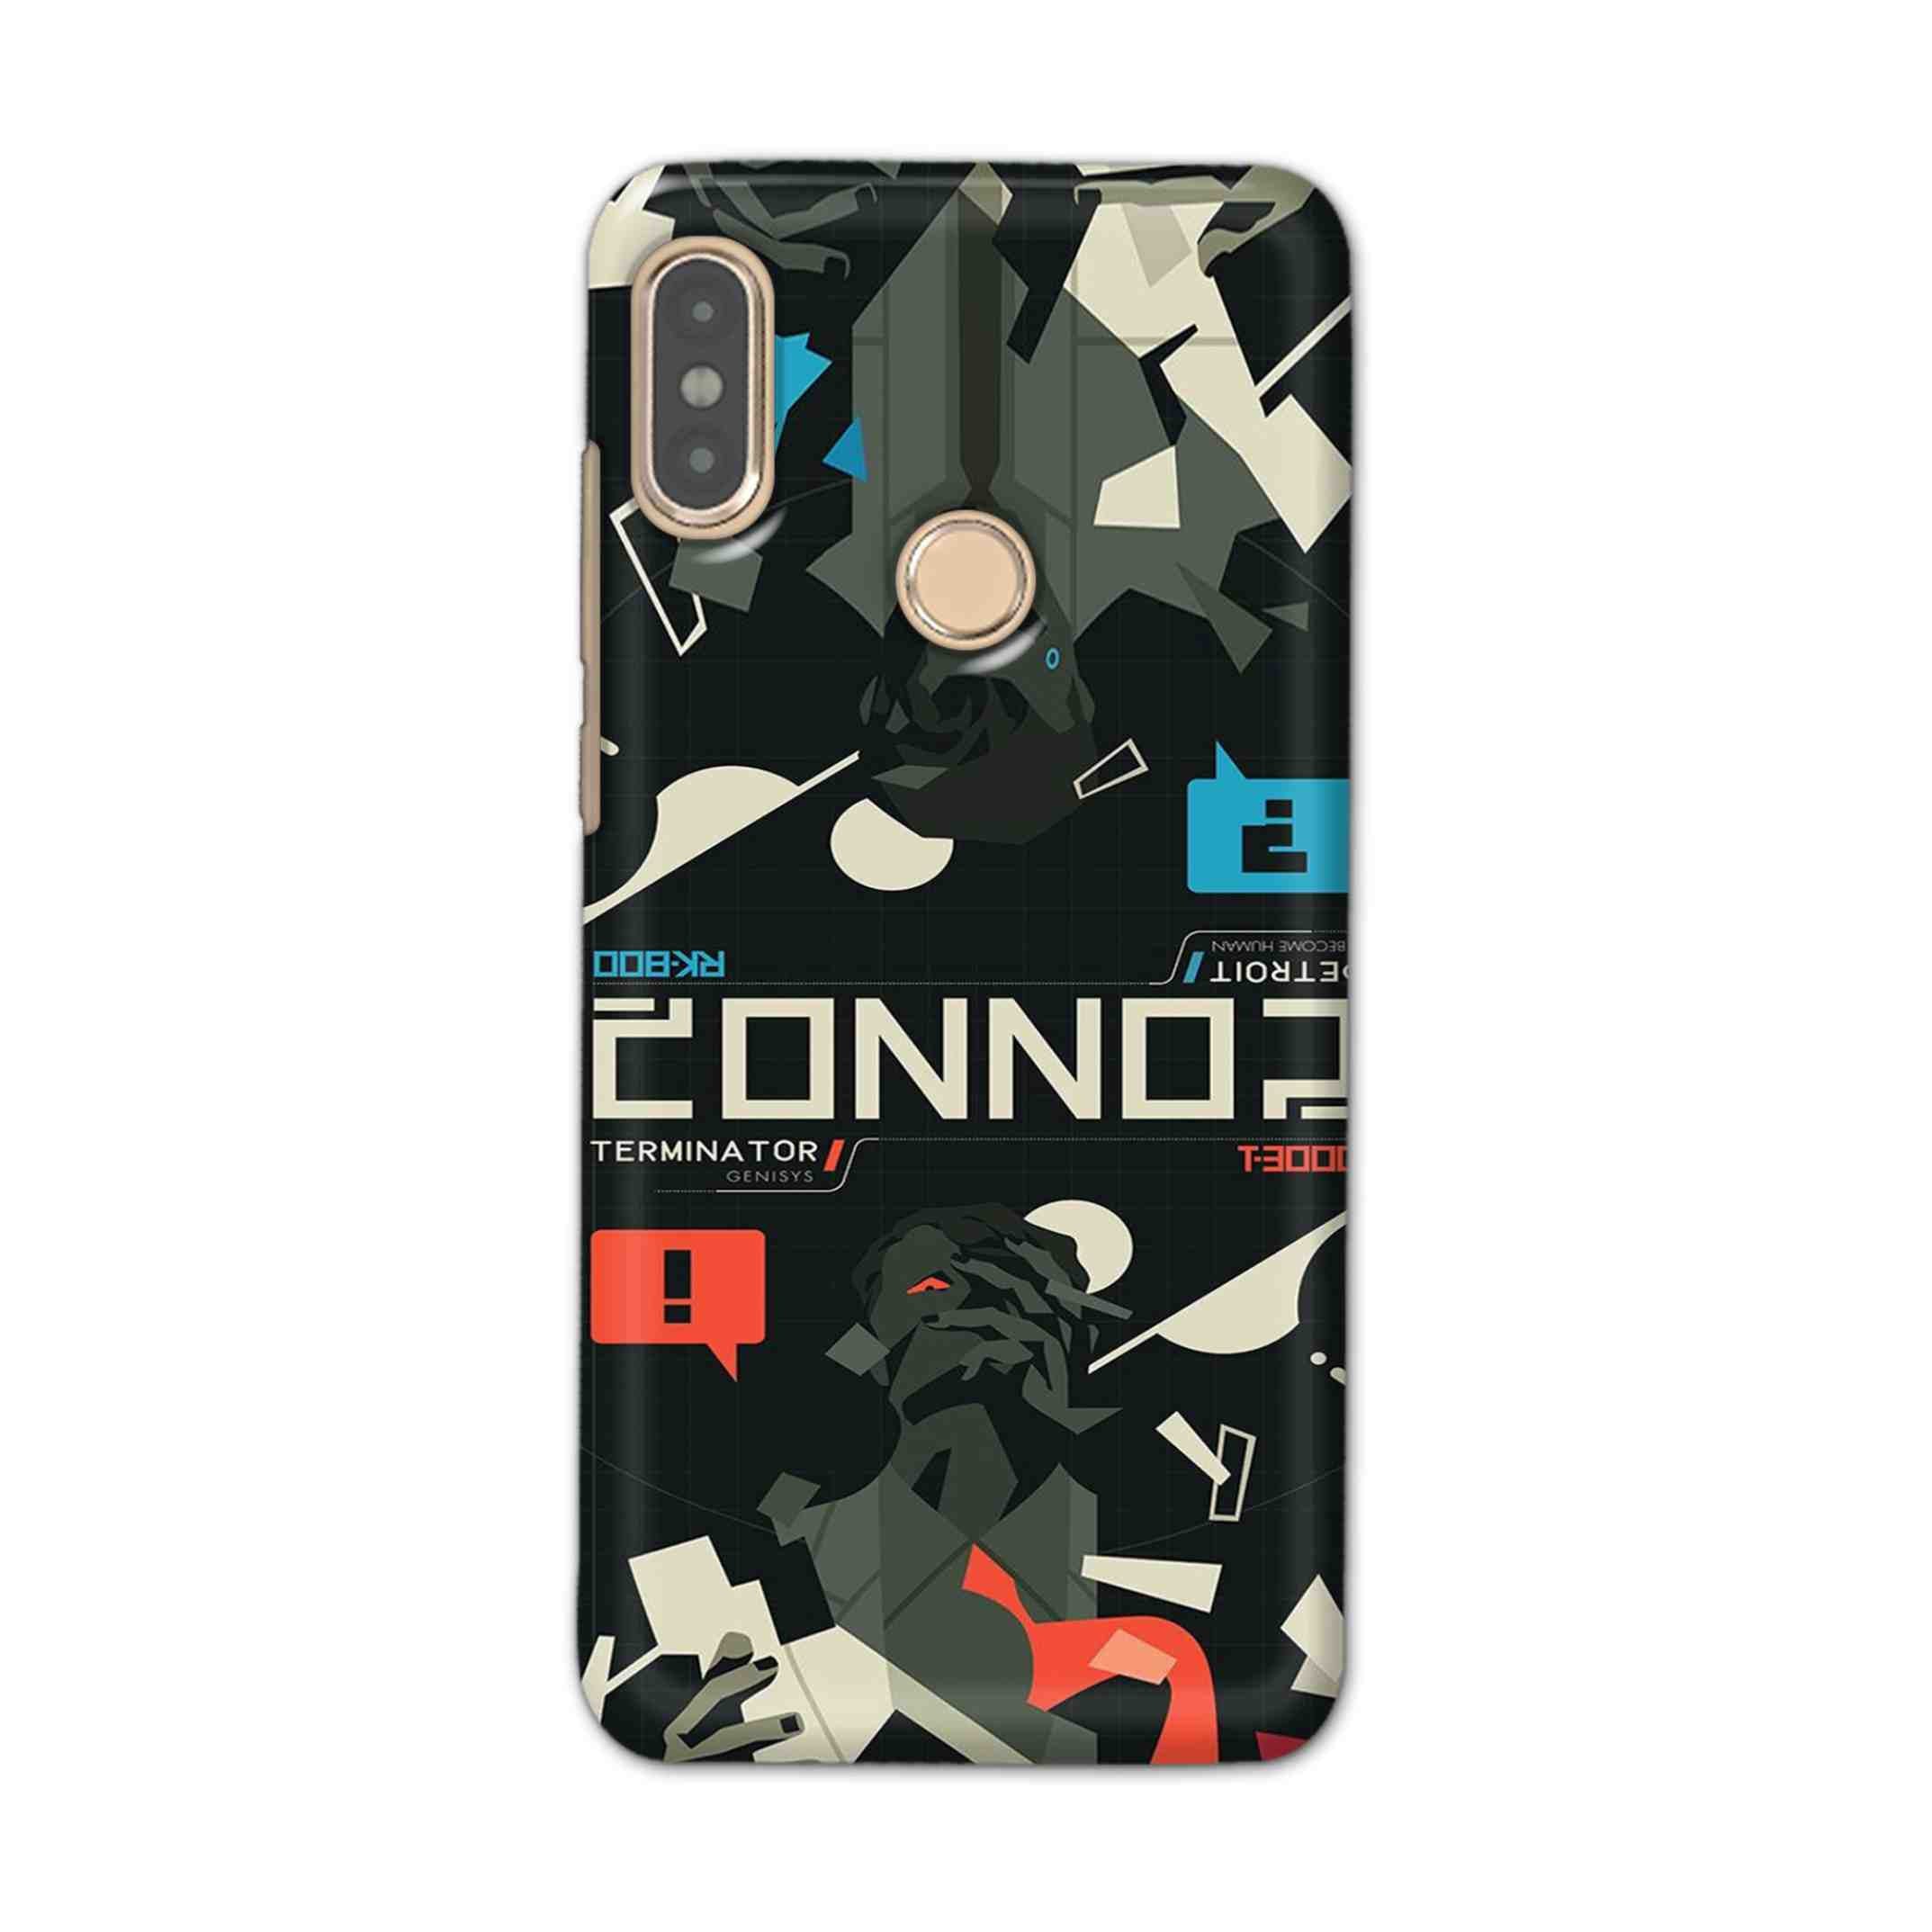 Buy Terminator Hard Back Mobile Phone Case Cover For Xiaomi Redmi Note 5 Pro Online